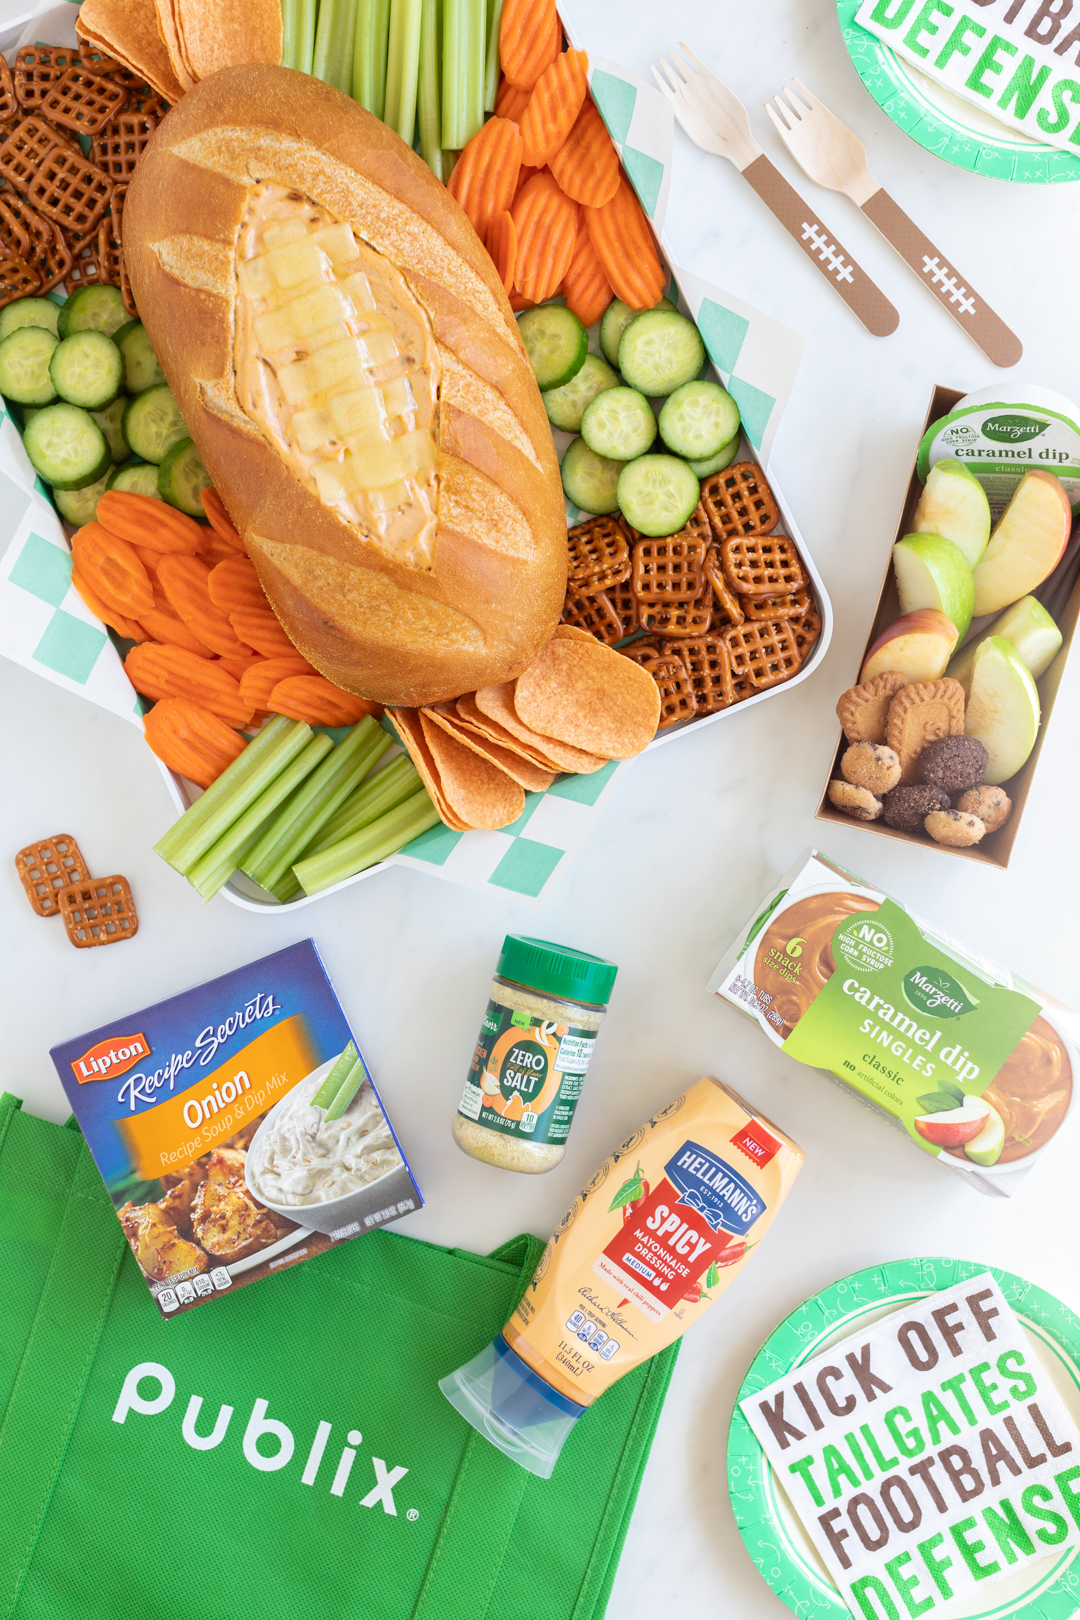 ingredients used to make football dip bread bowl and green reusable bag